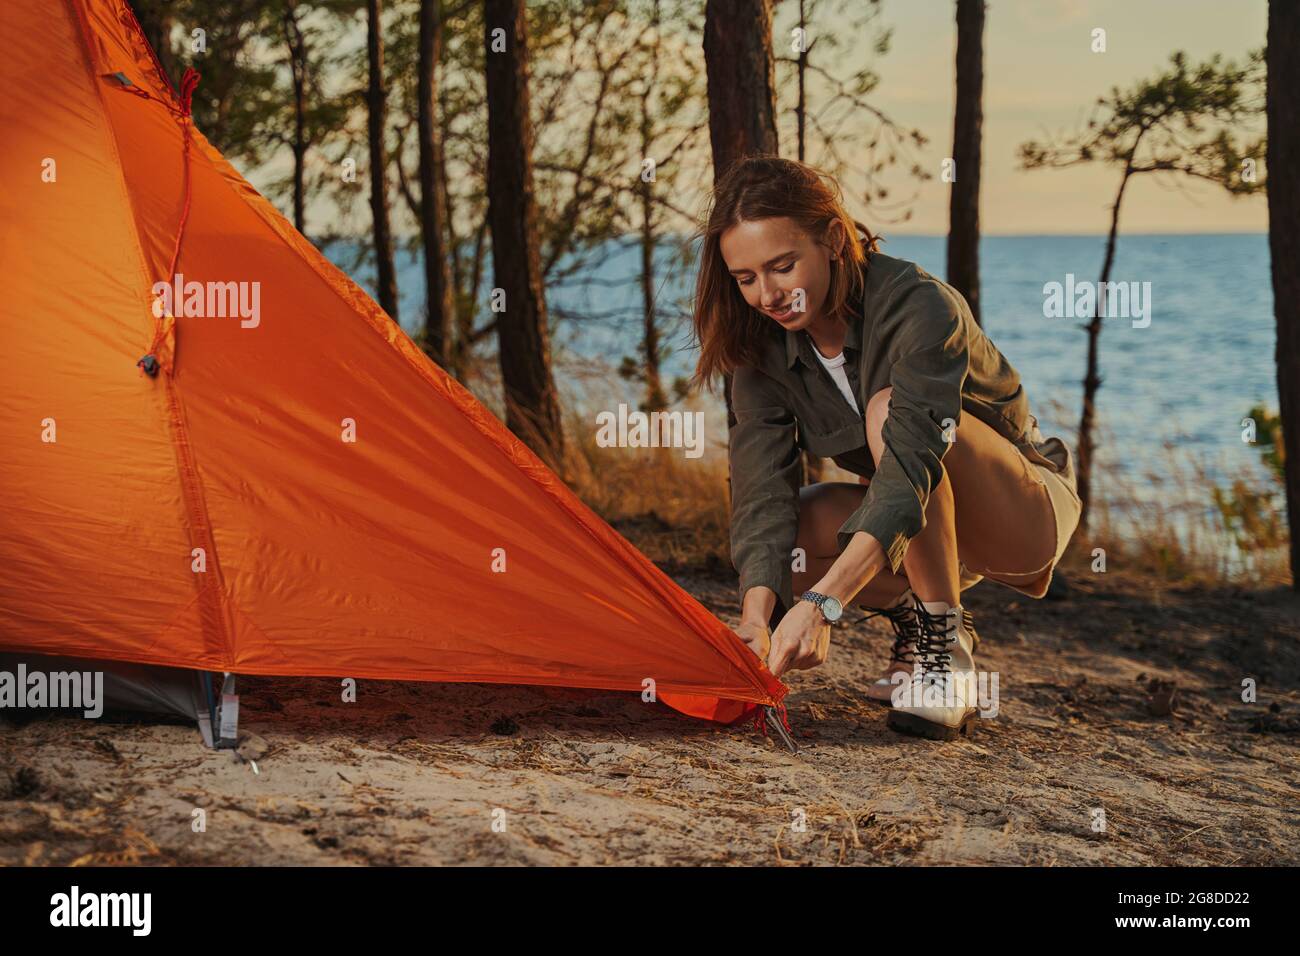 Lively woman installing an orange tent in the woods Stock Photo